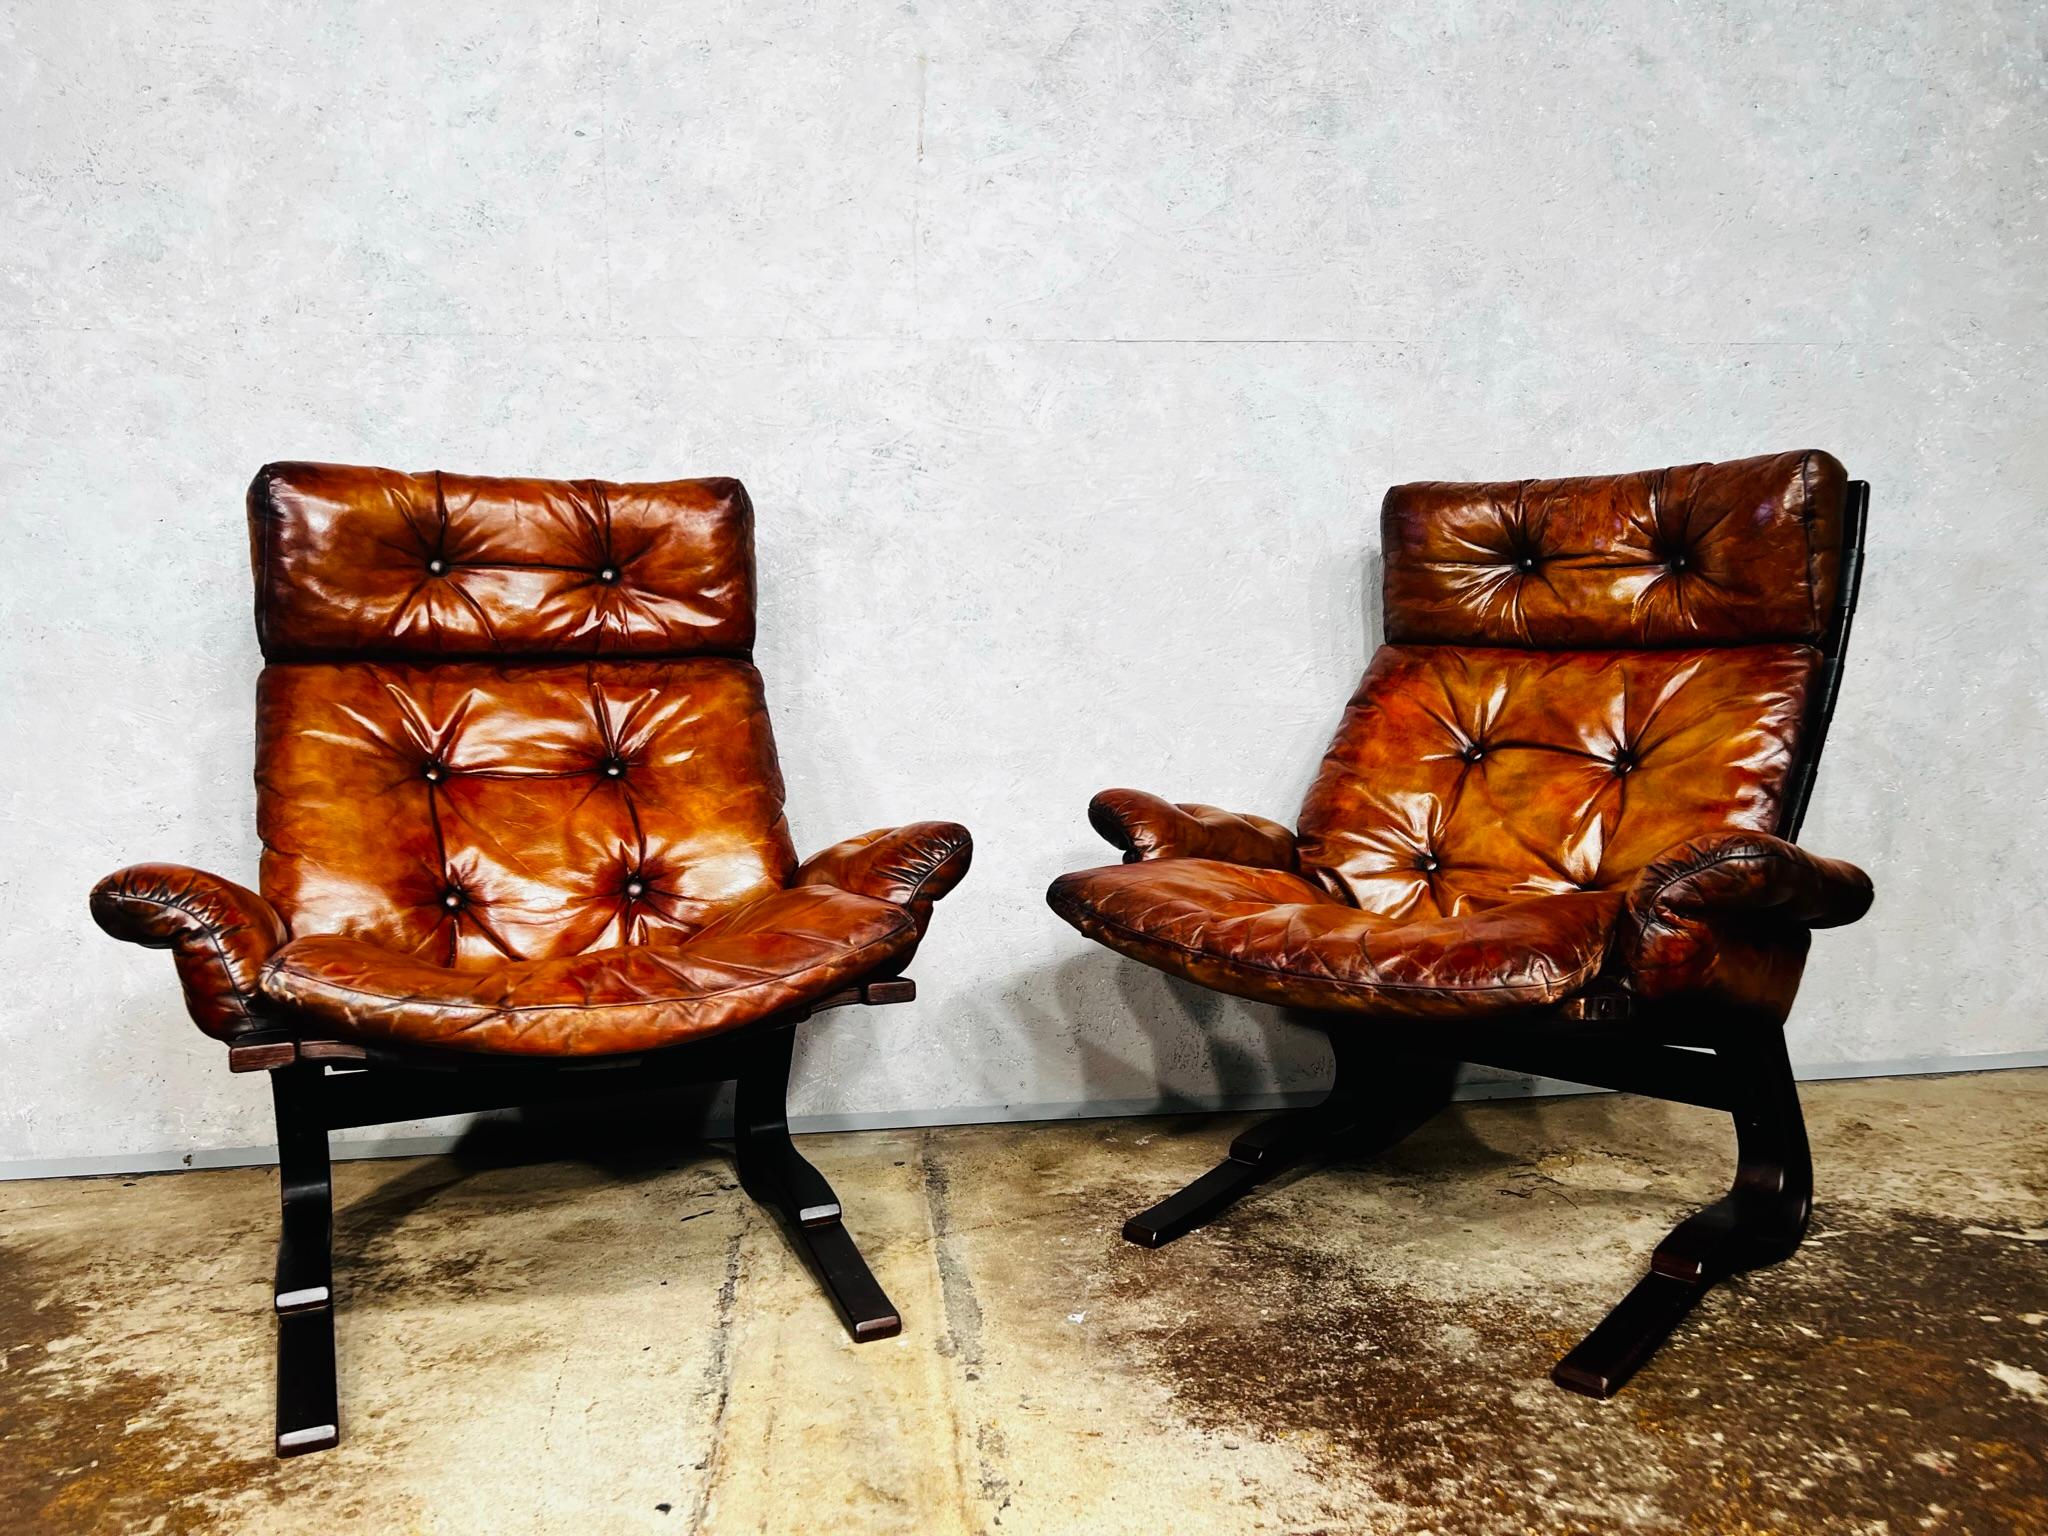 A Superb pair of Skyline chairs designed by Norwegian designer Einar Hove 1970

A great design and a generously sized chair, these chairs are very comfortable to sit in.

The leather is a beautiful hand dyed light tan colour, it has a great